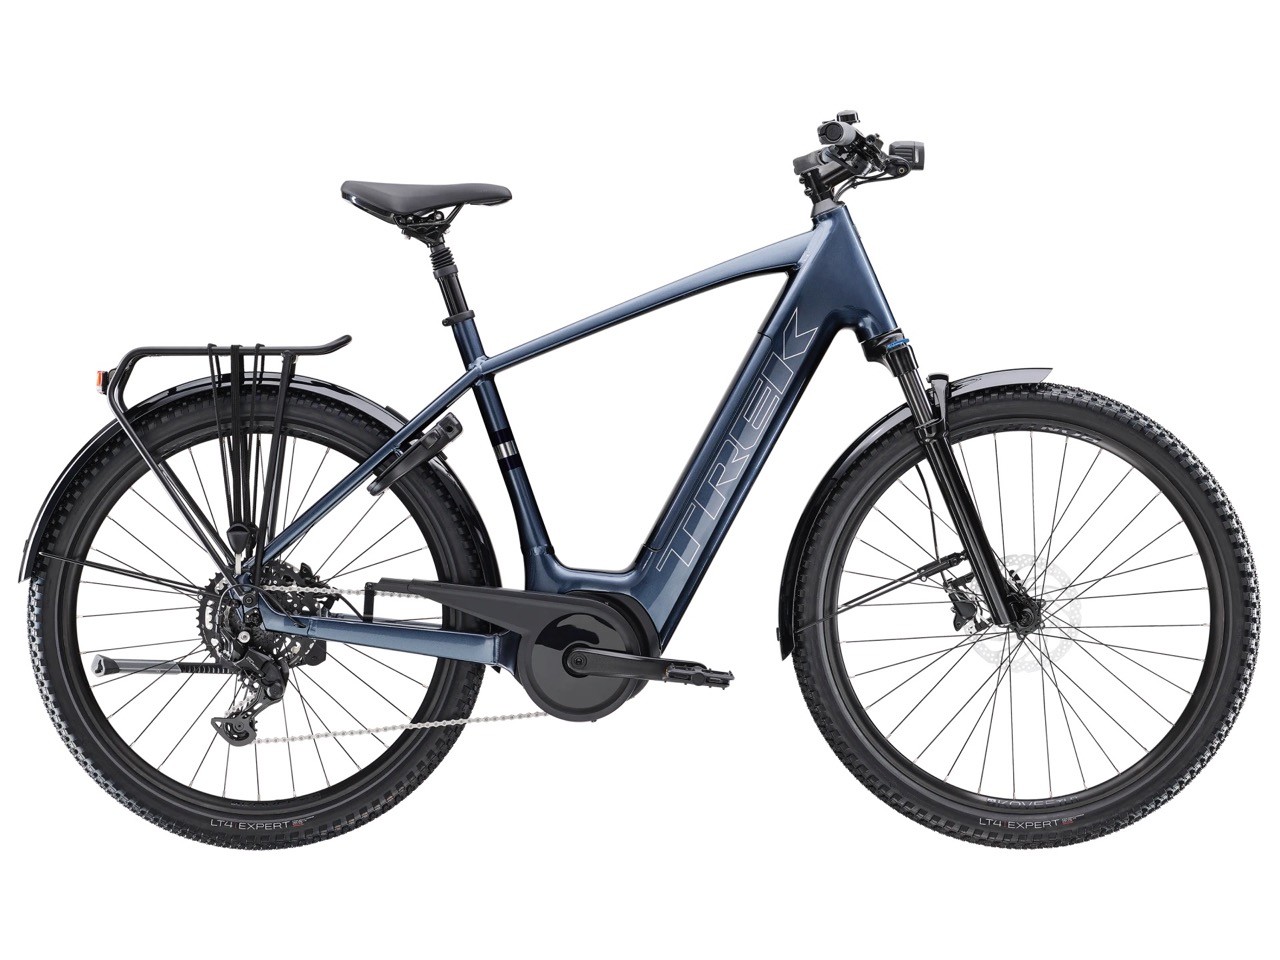 Verve+ 4 800WH Galactic Grey